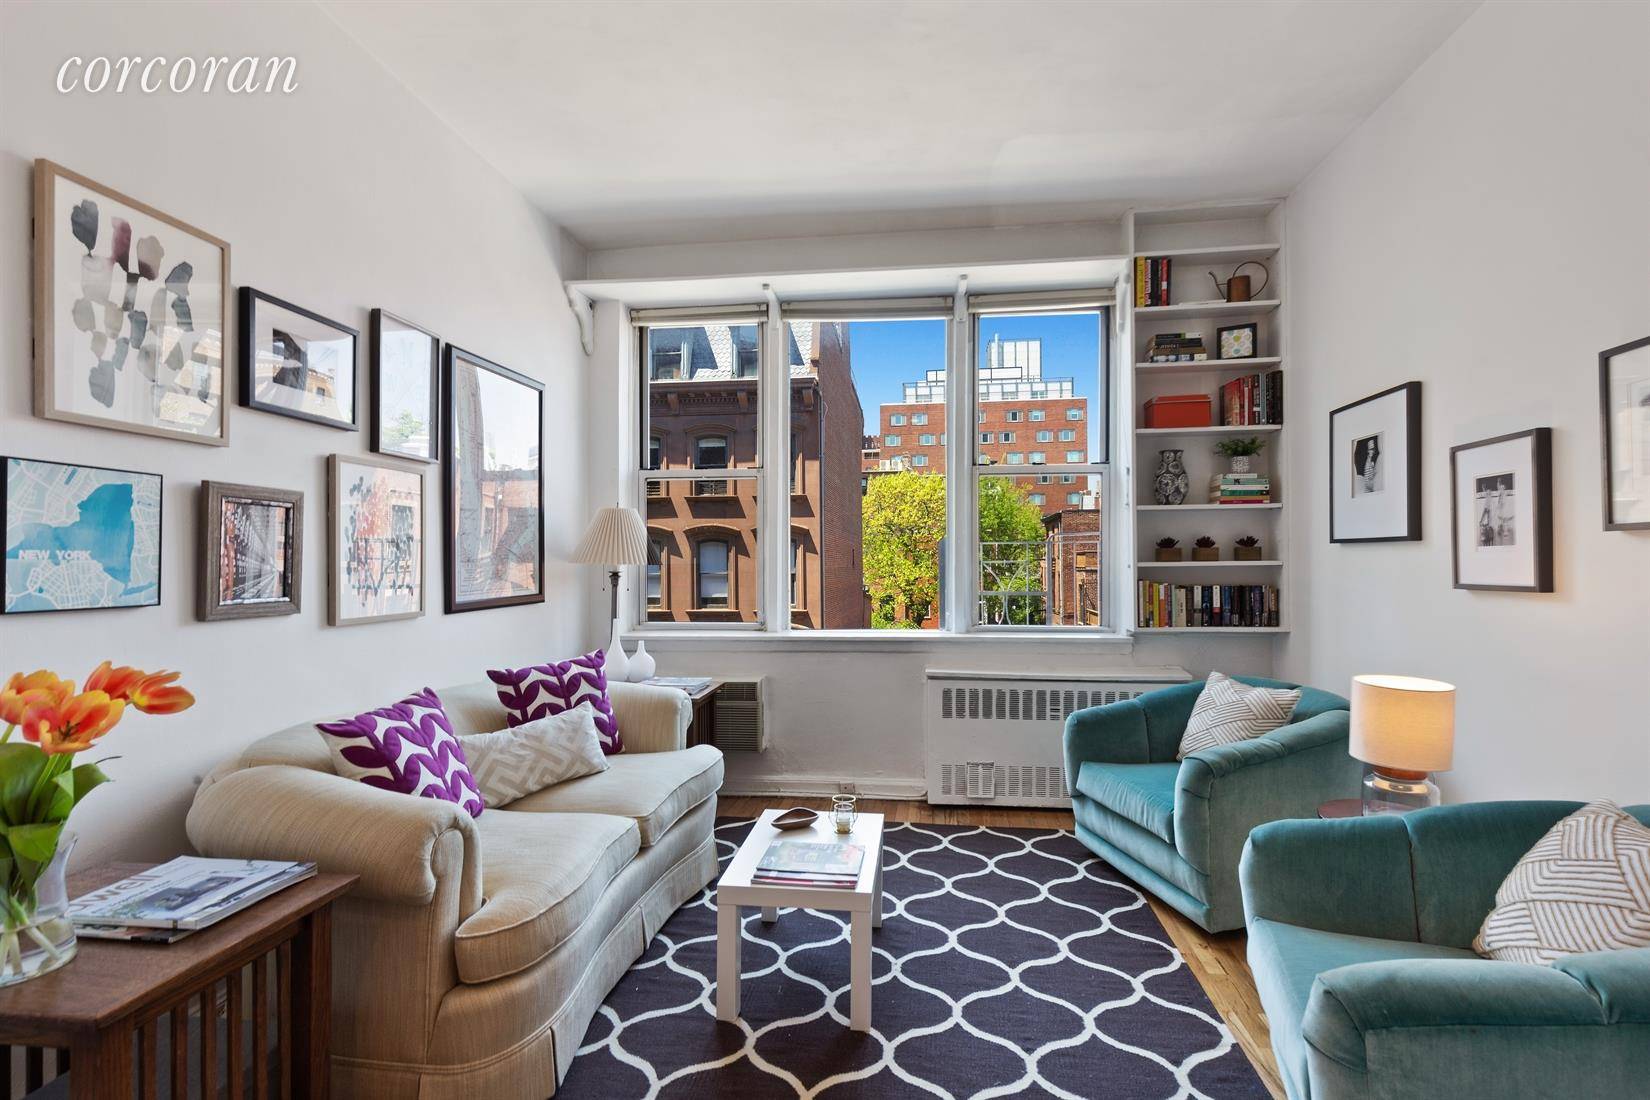 This delightful one bedroom apartment in prime Brooklyn Heights has amazing views and is bound to charm.